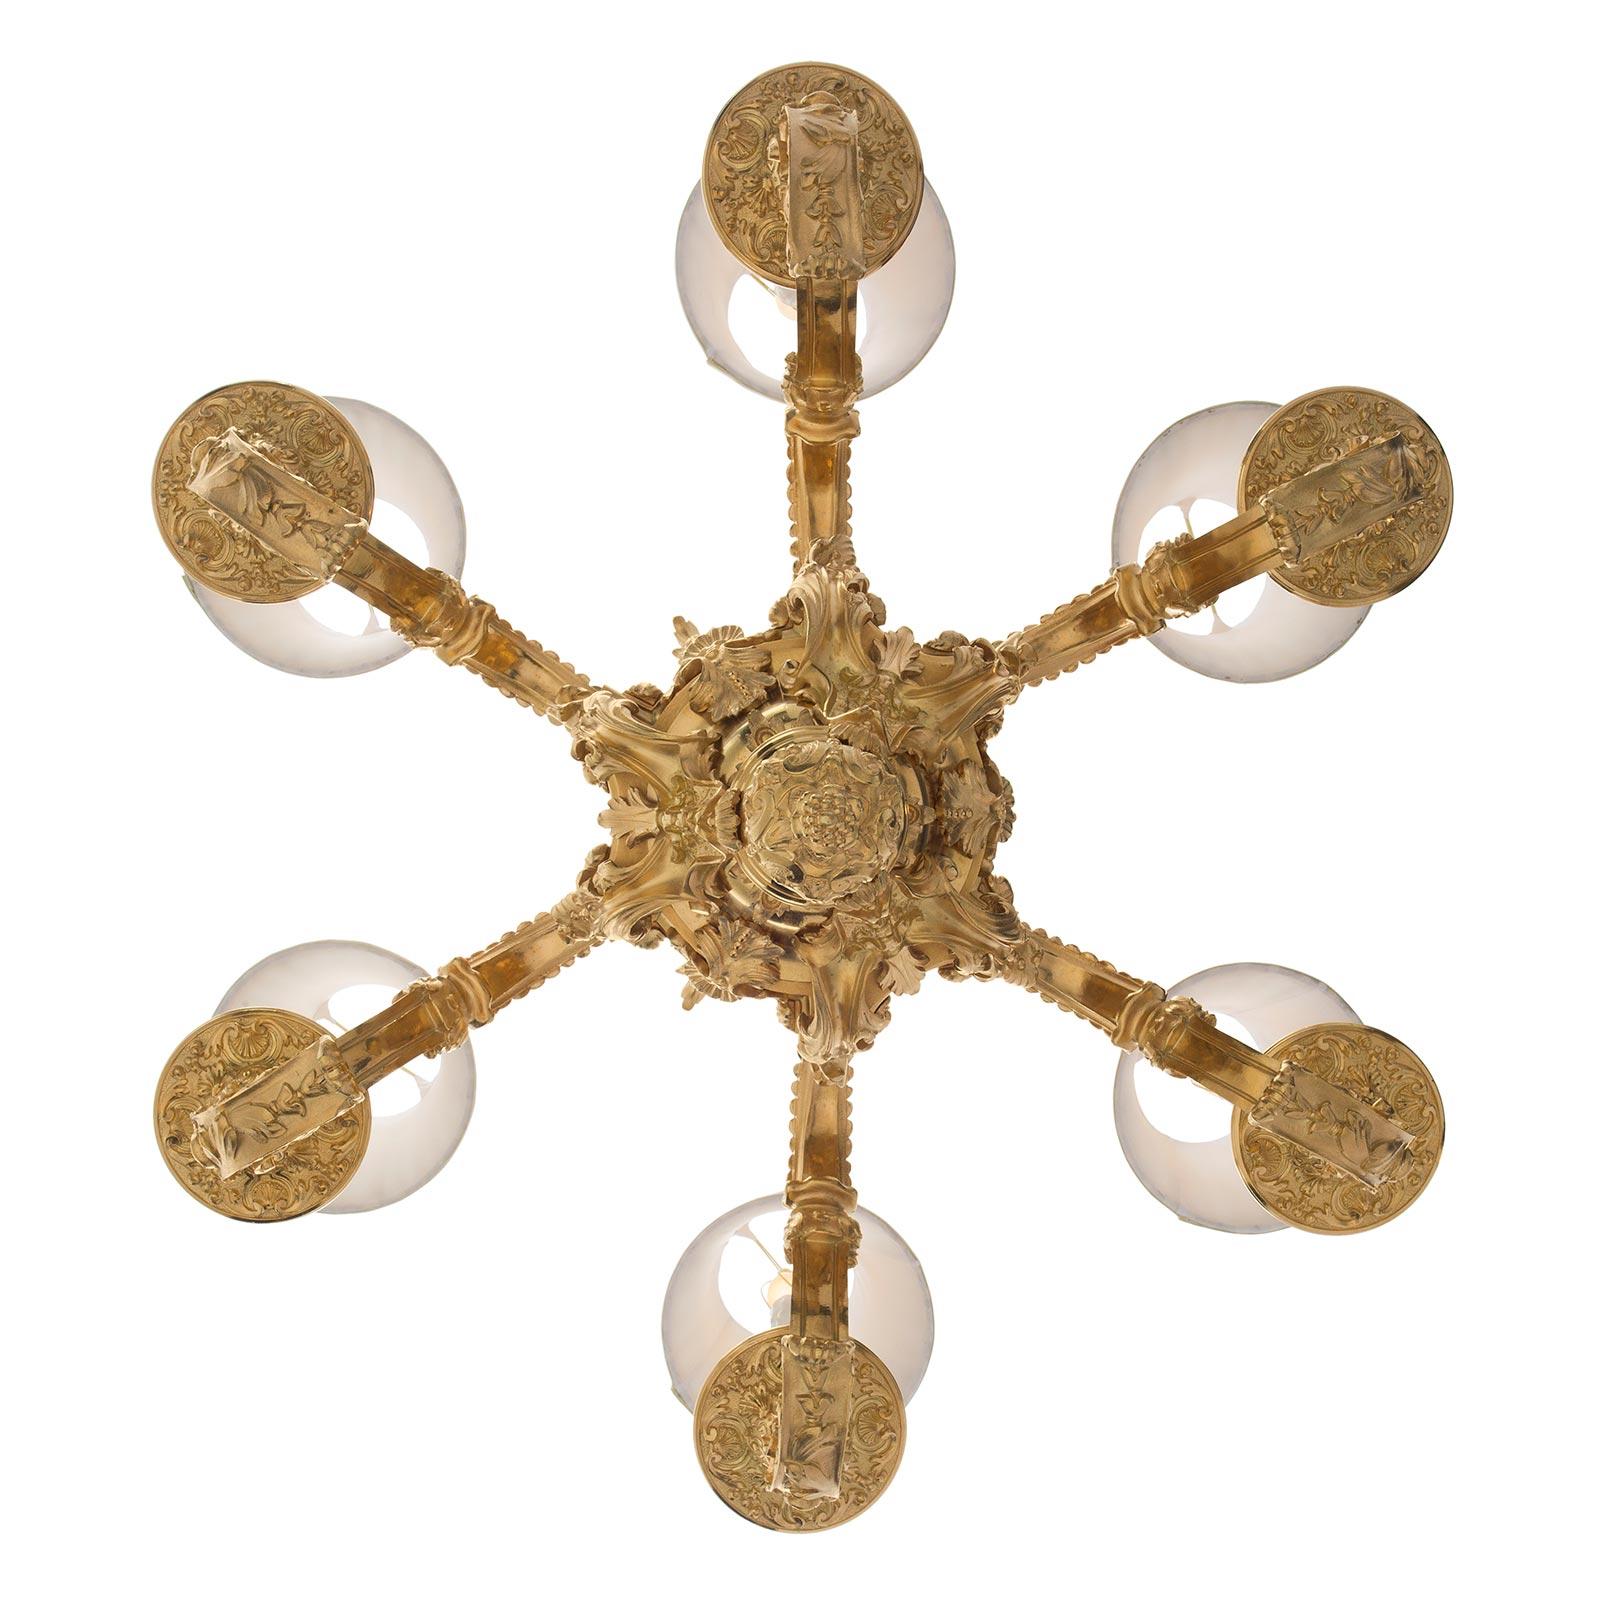  French 19th Century Renaissance Style Ormolu Six-Light Chandelier For Sale 2